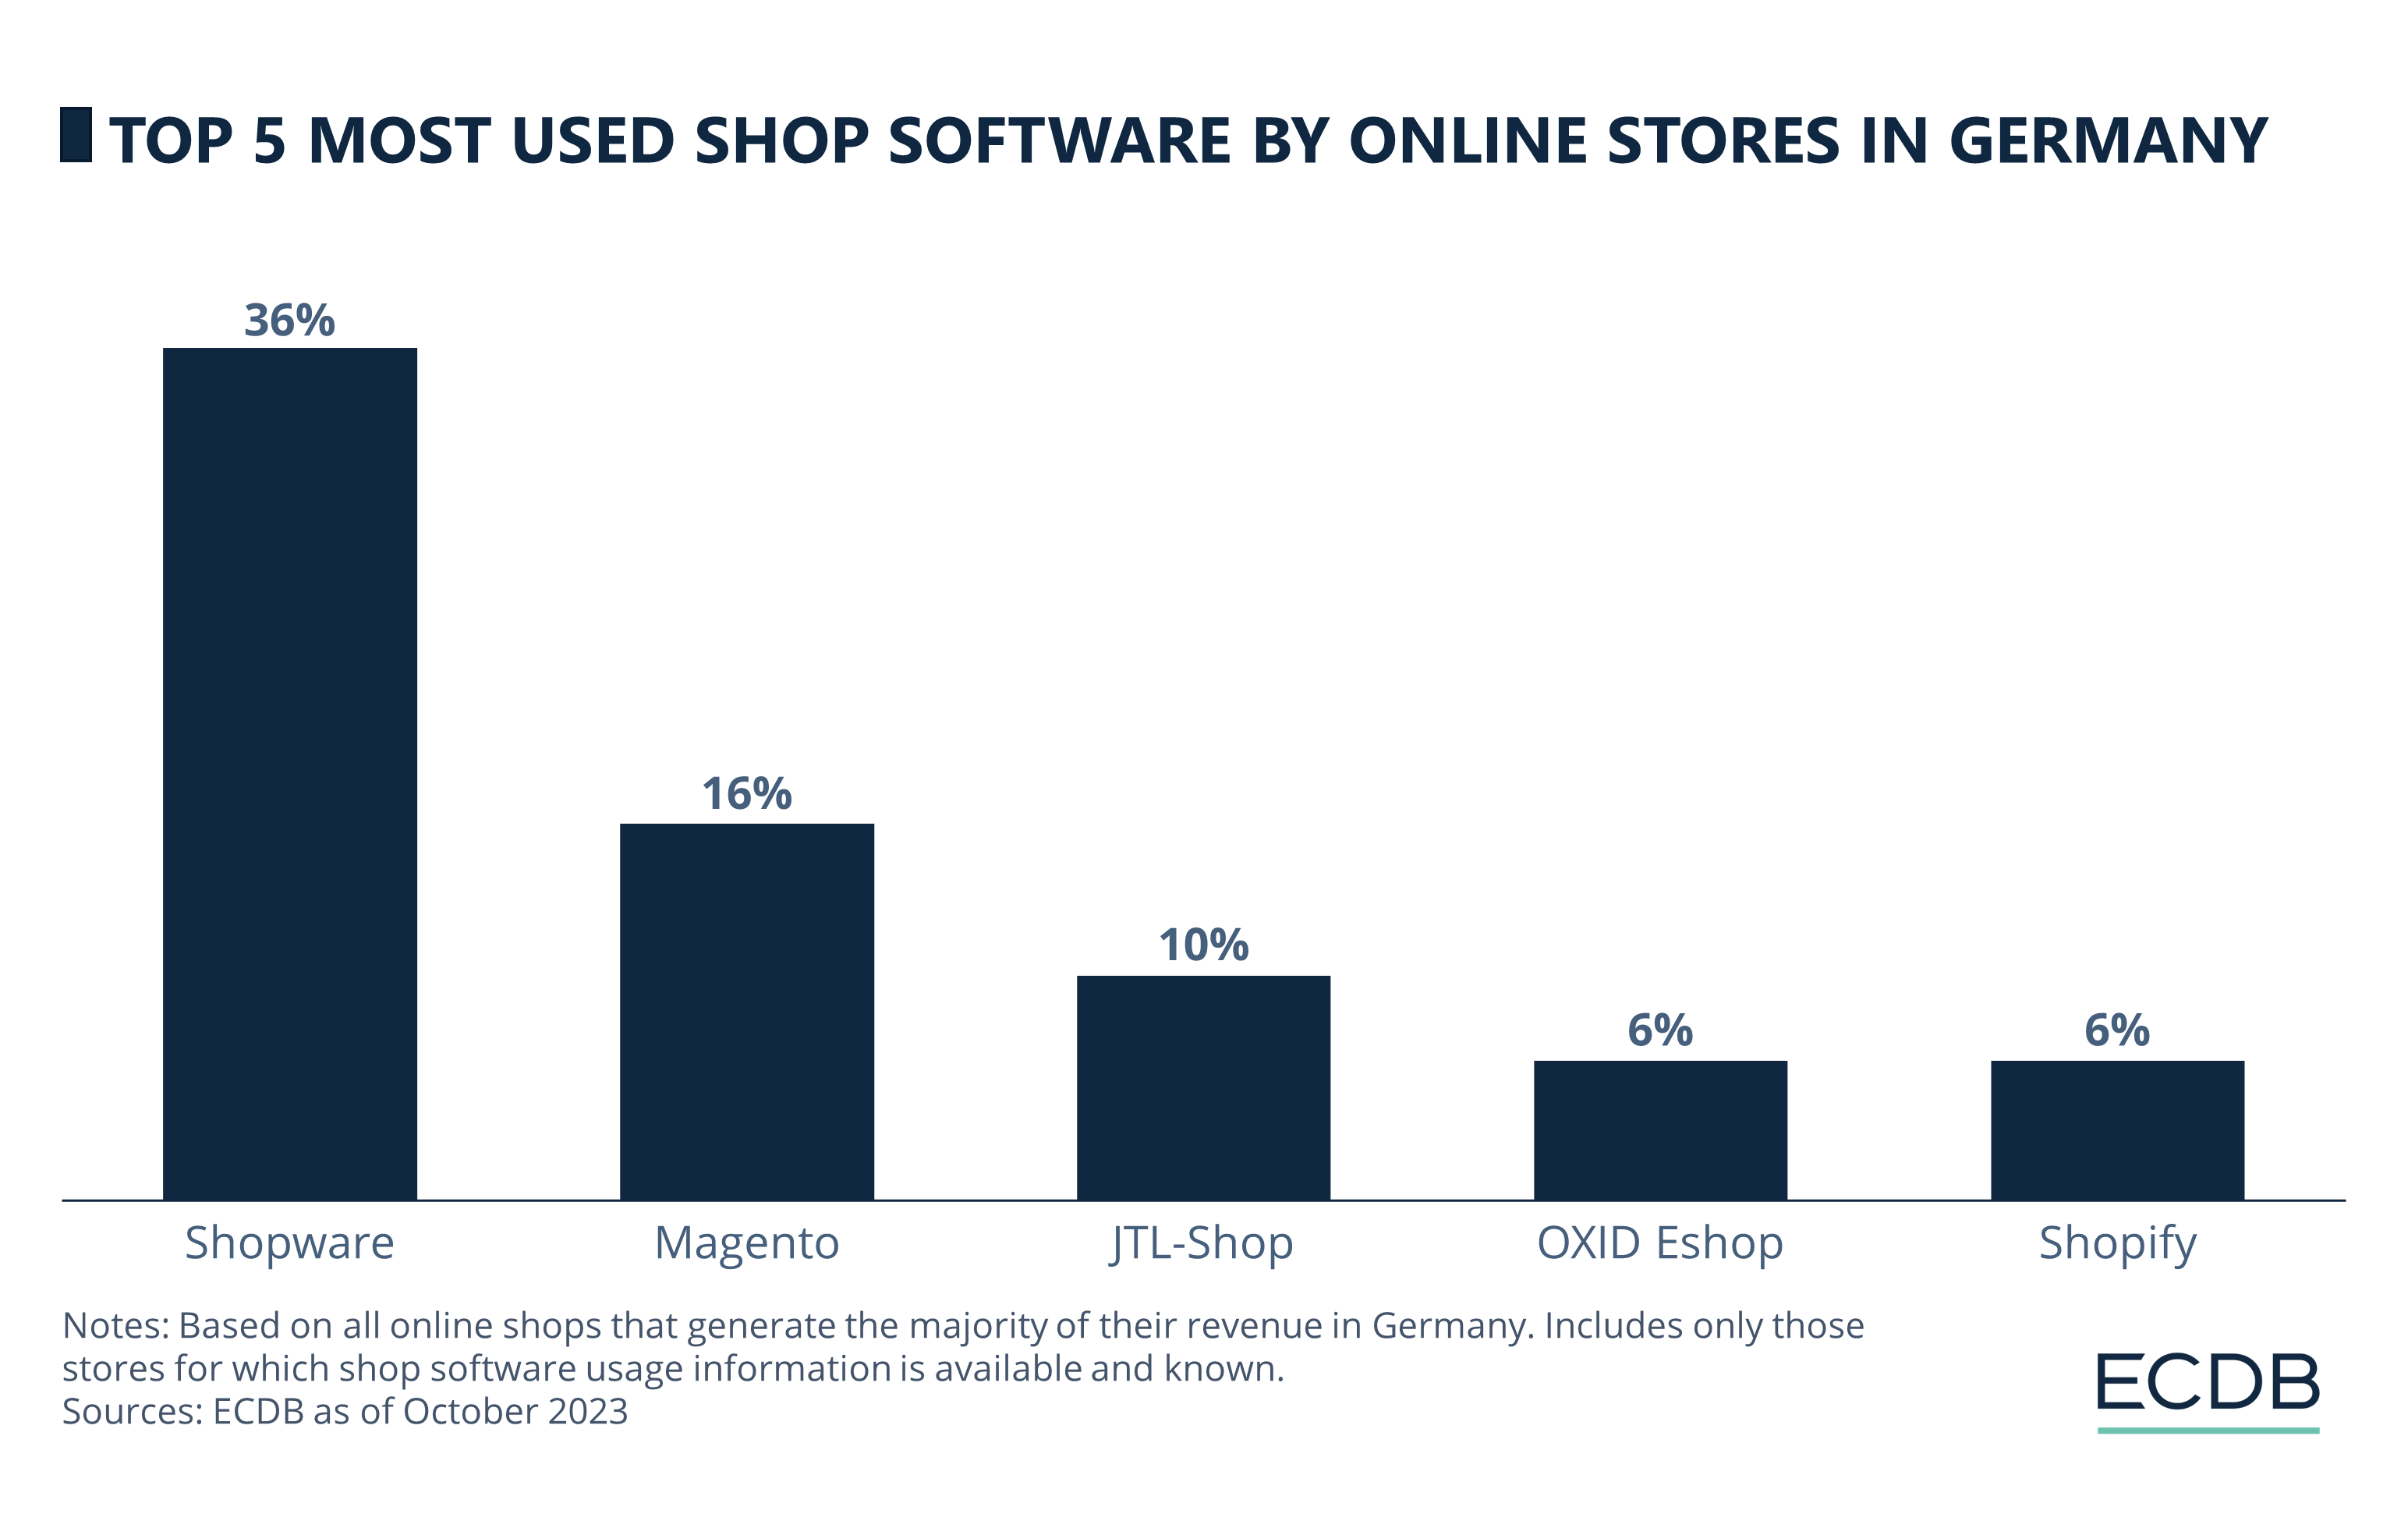 Top 5 Most Used Shop Software by Online Stores in Germany